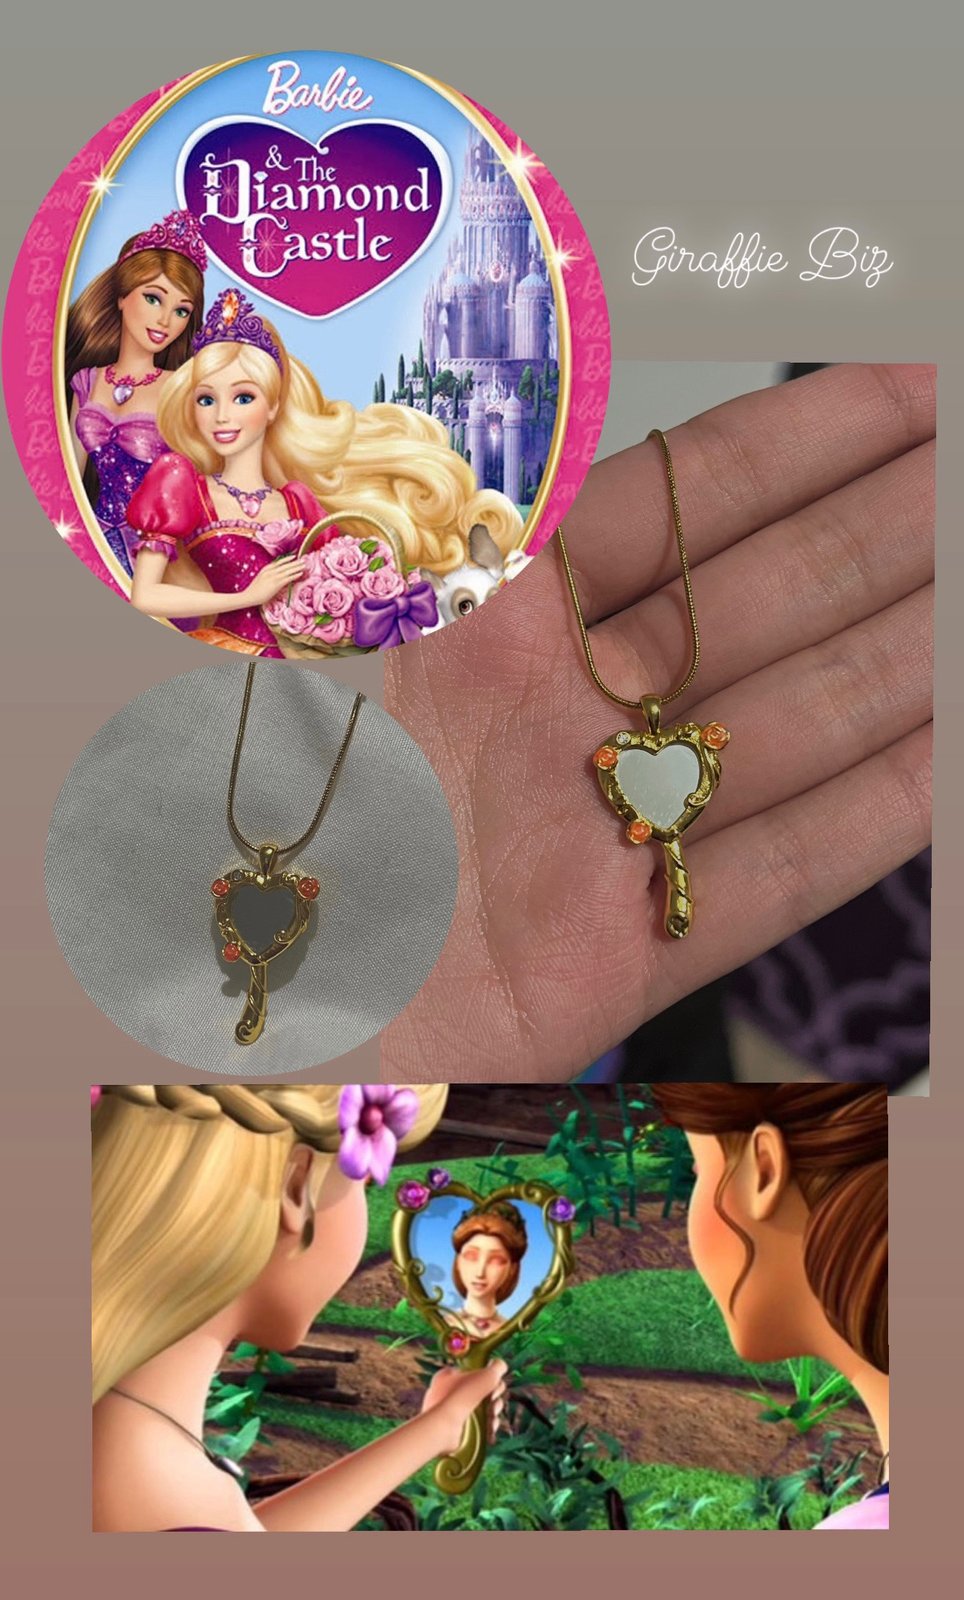 WuLi77 Heart Valentine's Day Necklace Barby Diamond Castle Necklace  Fairytale Cosplay Jewelry Gift for Mom Women Girls barbie diamond castle  necklace heart, Pink : Amazon.co.uk: Fashion